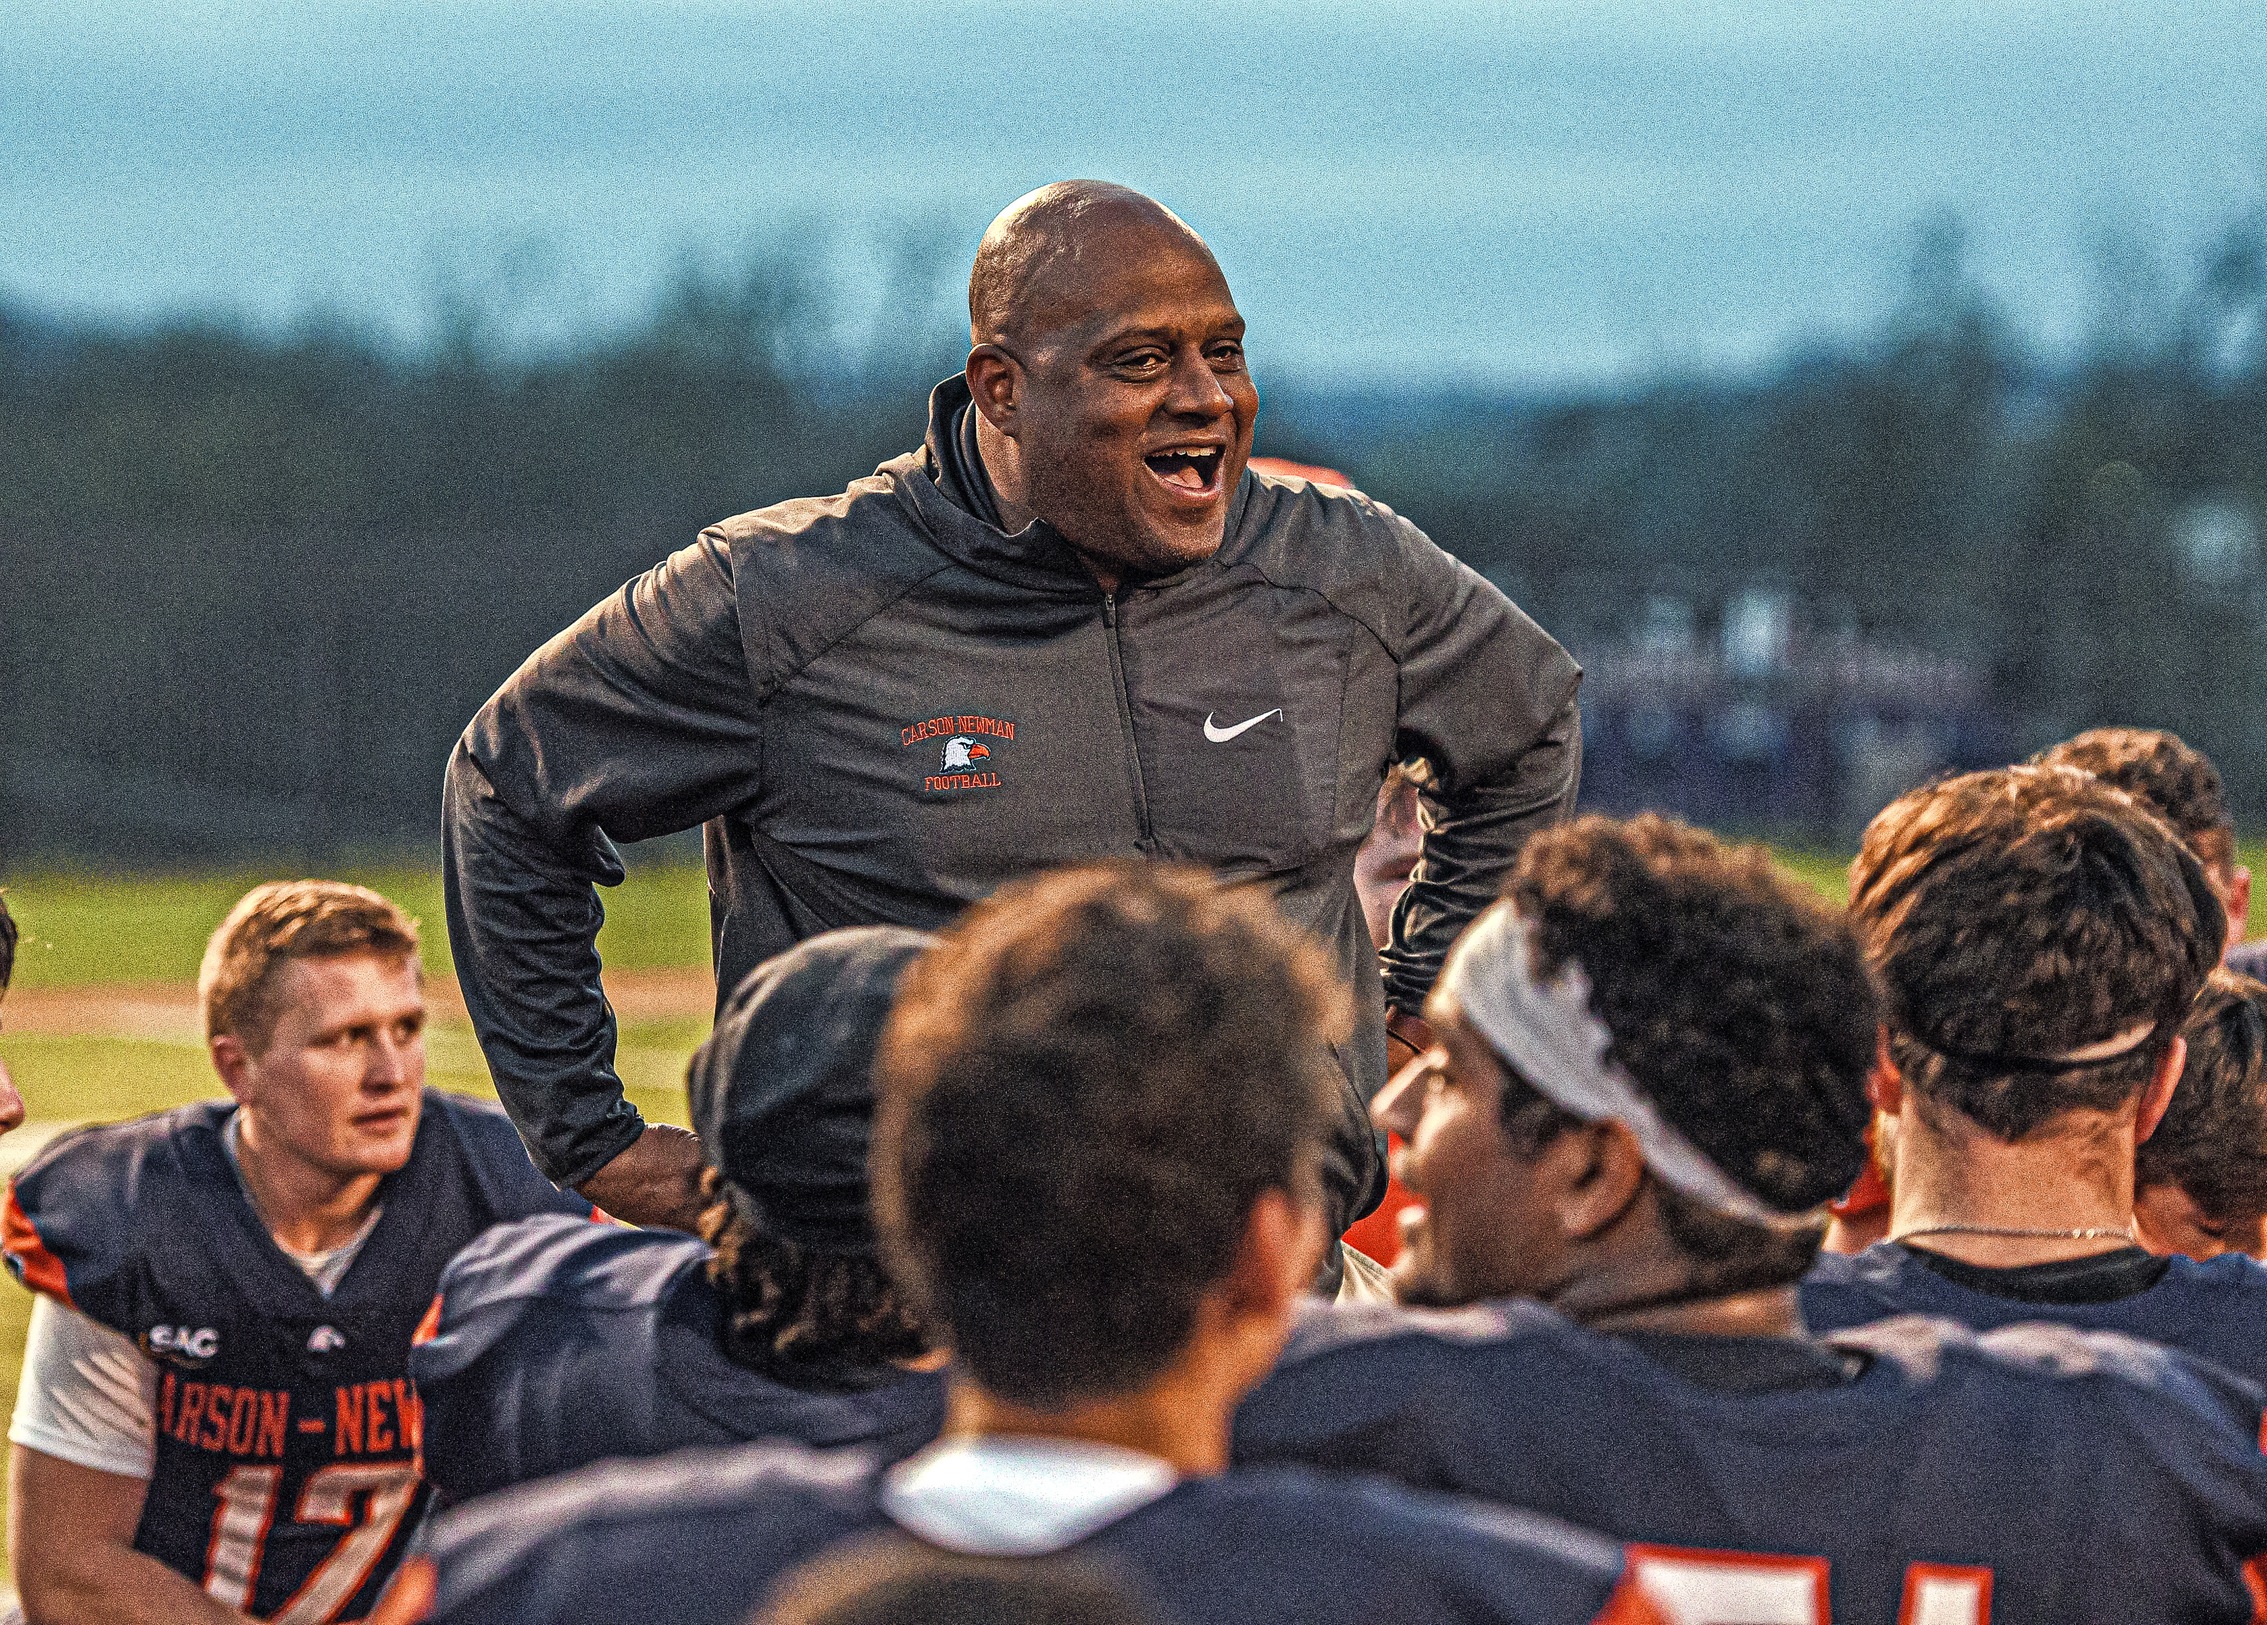 Carson-Newman football to play host to quartet of camps in June